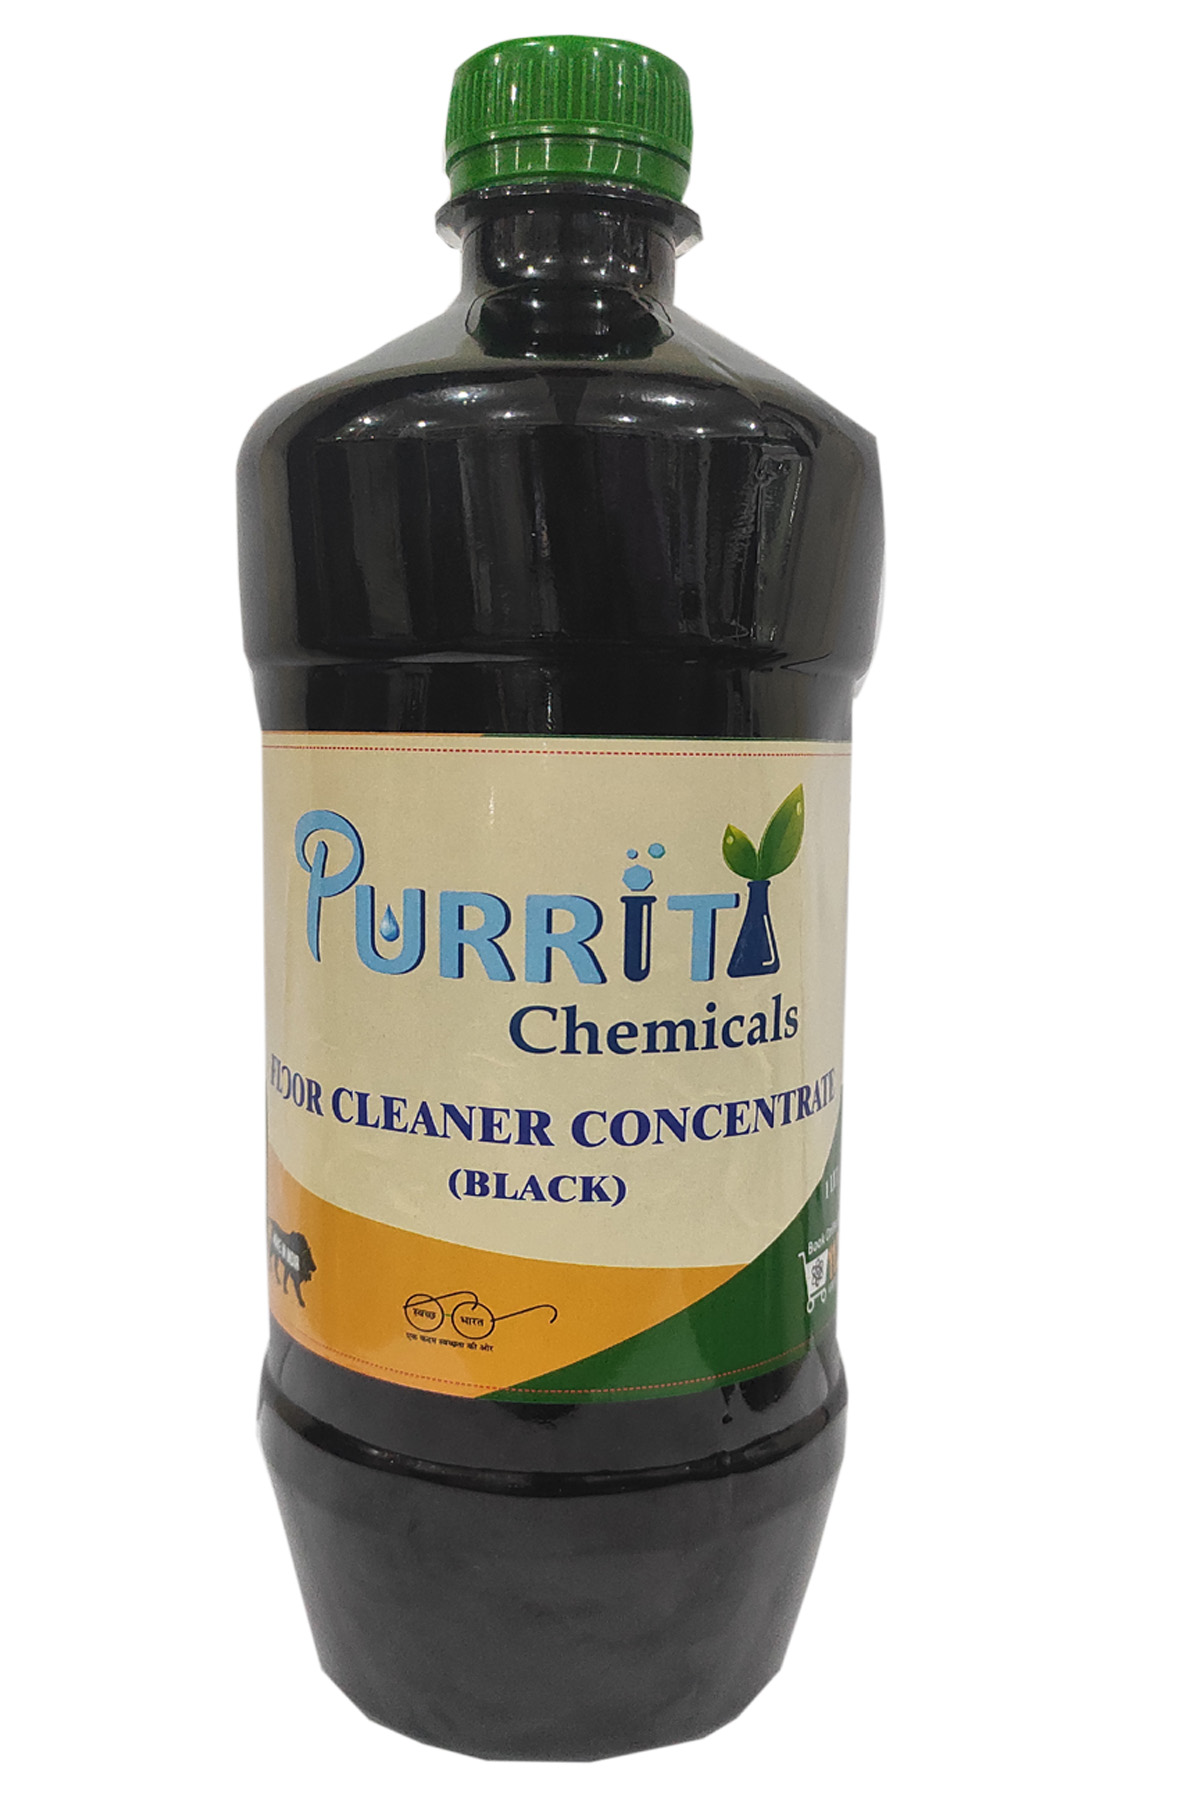 floor-cleaner-concentrate-black-1-ltr-purrity-chemical